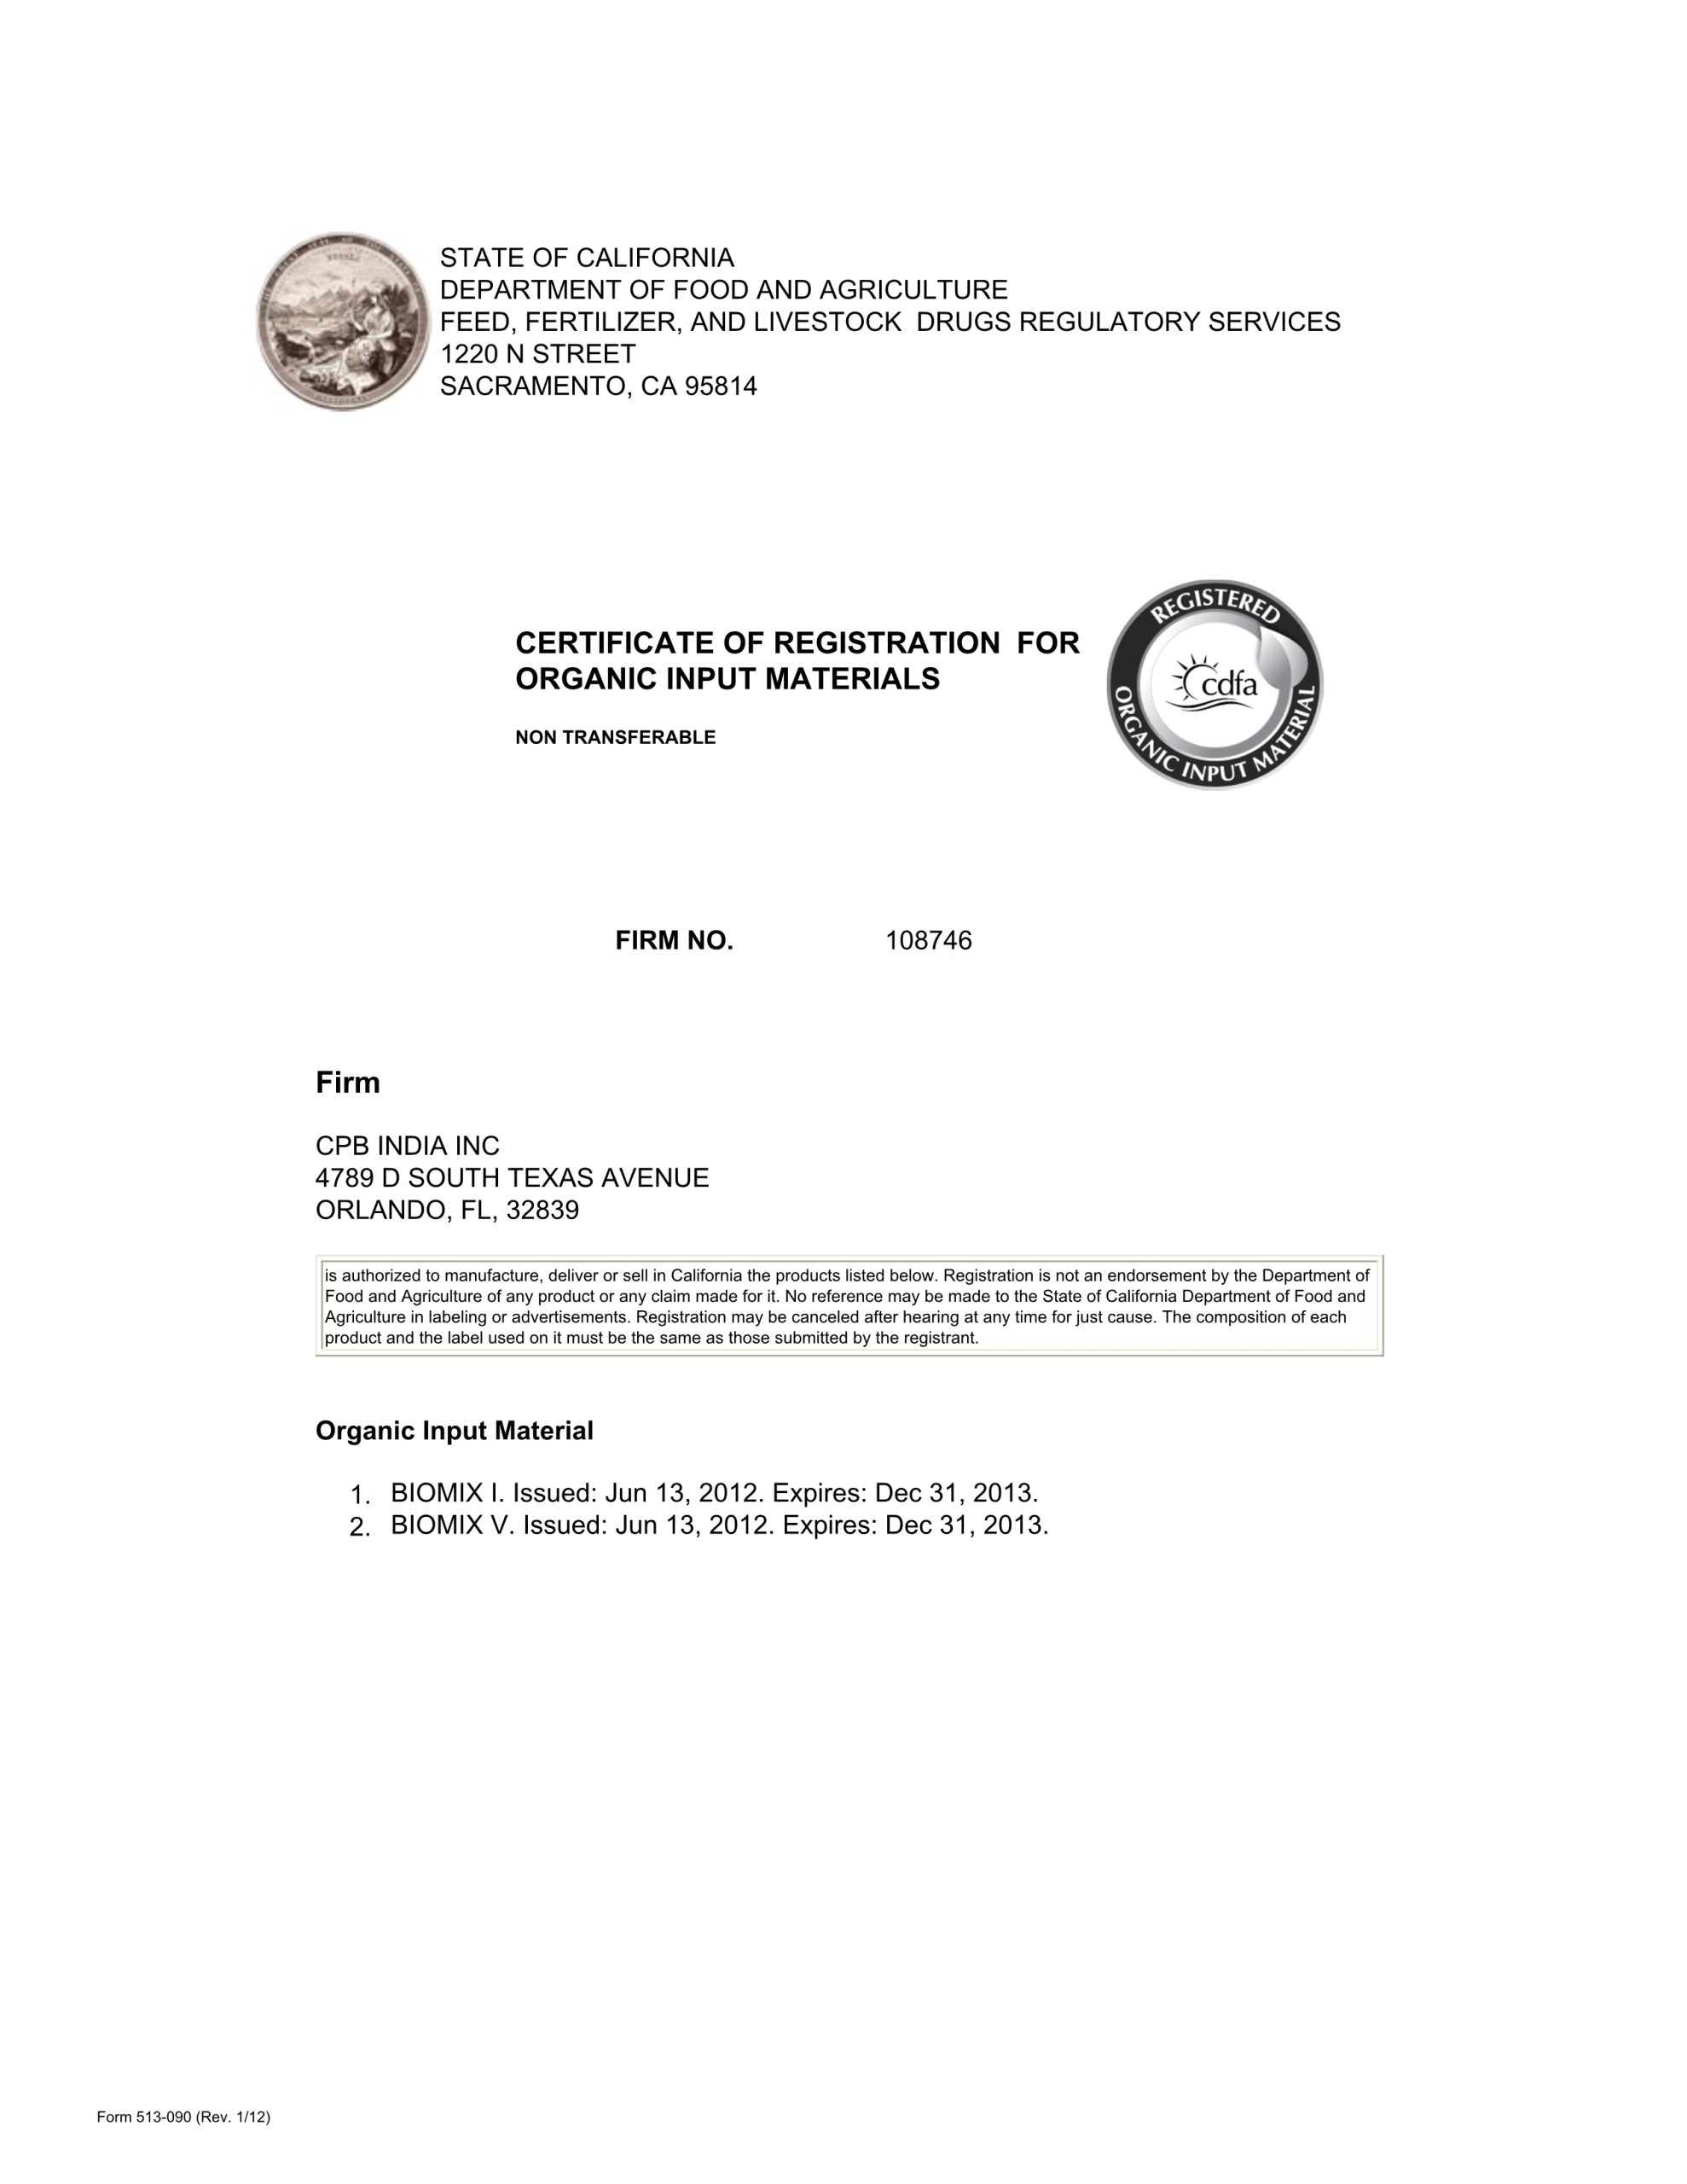 Practical Completion Certificate Template Jct – Compilation 2020 Throughout Practical Completion Certificate Template Uk